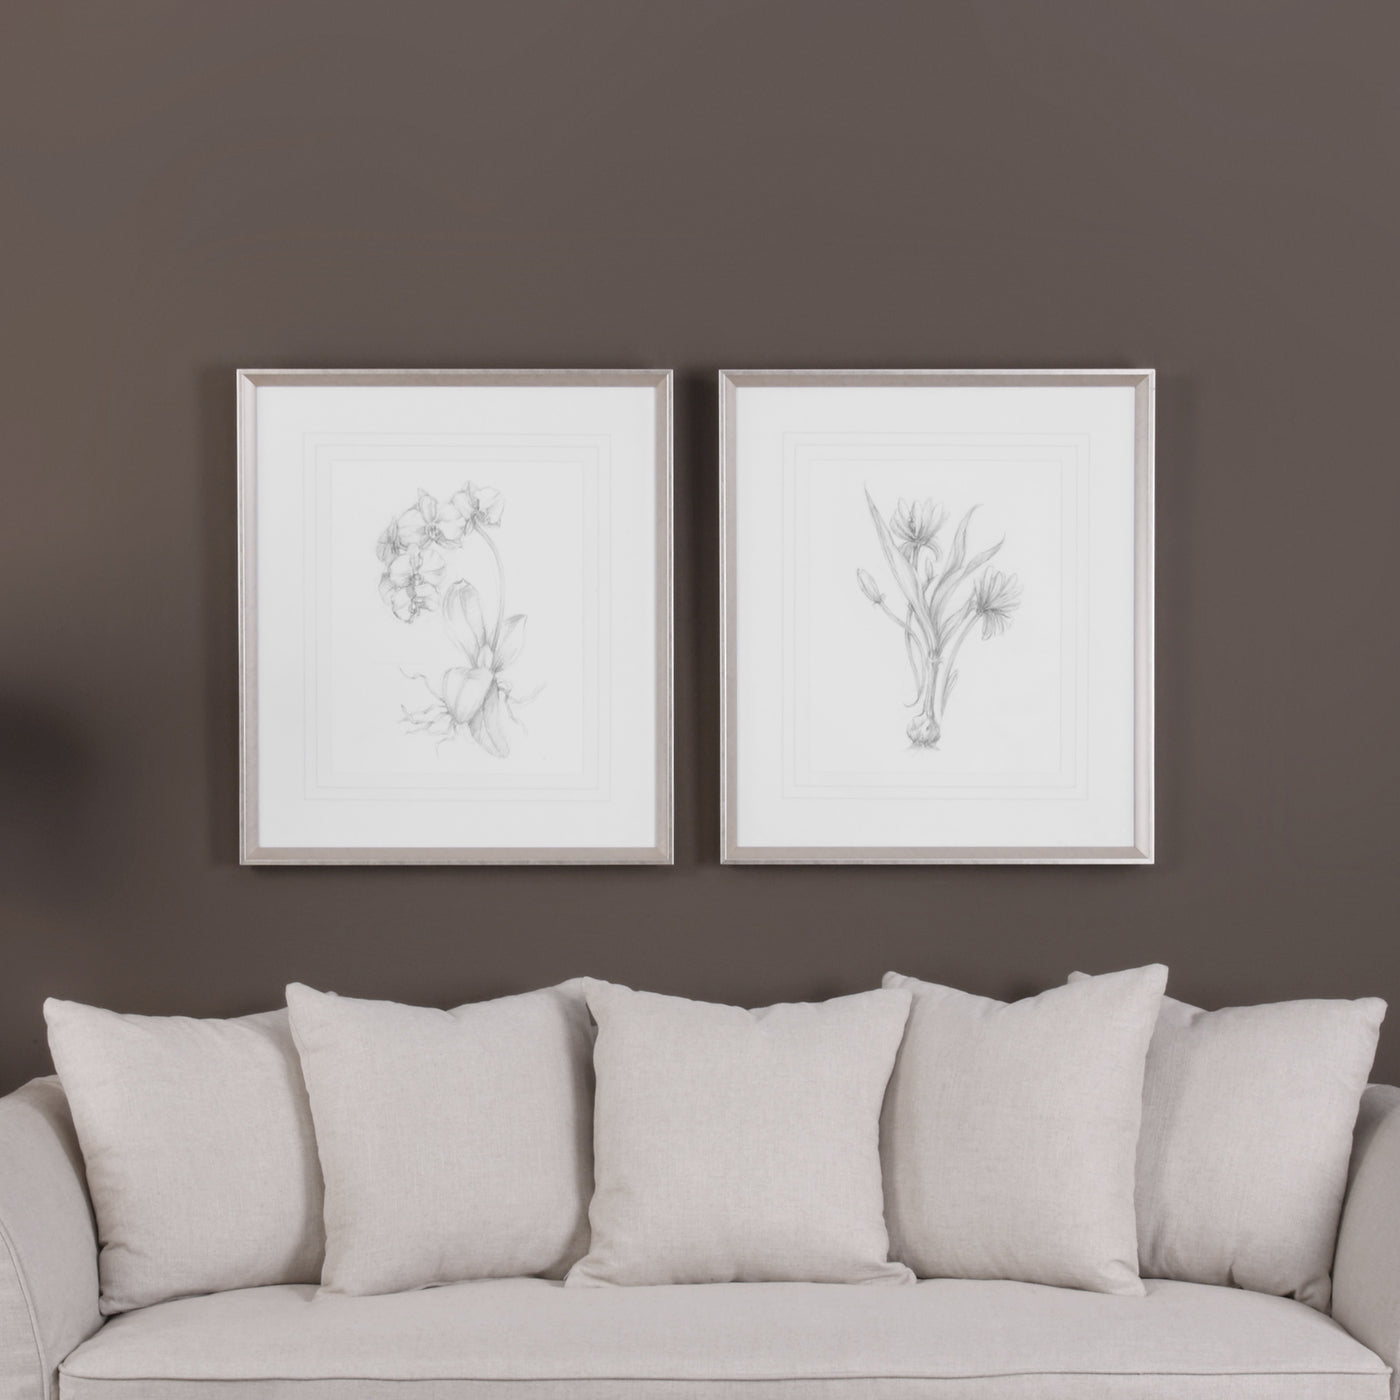 Minimalist In Design, These Simple Floral Sketches Work Seamlessly With A Variety Of Styles. Each Sketch Is Surrounded By ...